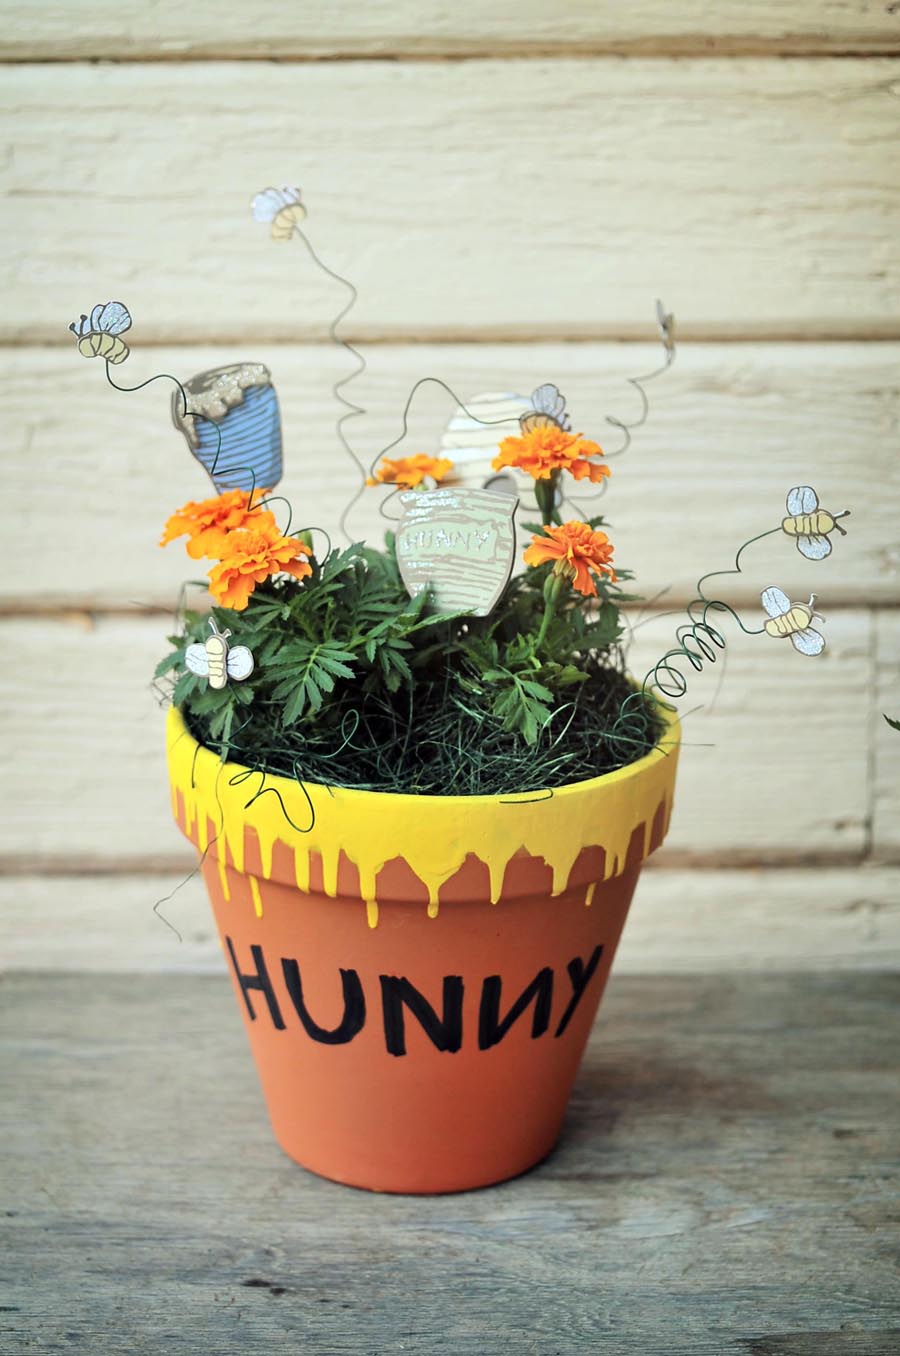 Hunny Pots and Pooh Sticks – Winnie the Pooh Baby Shower Decorations